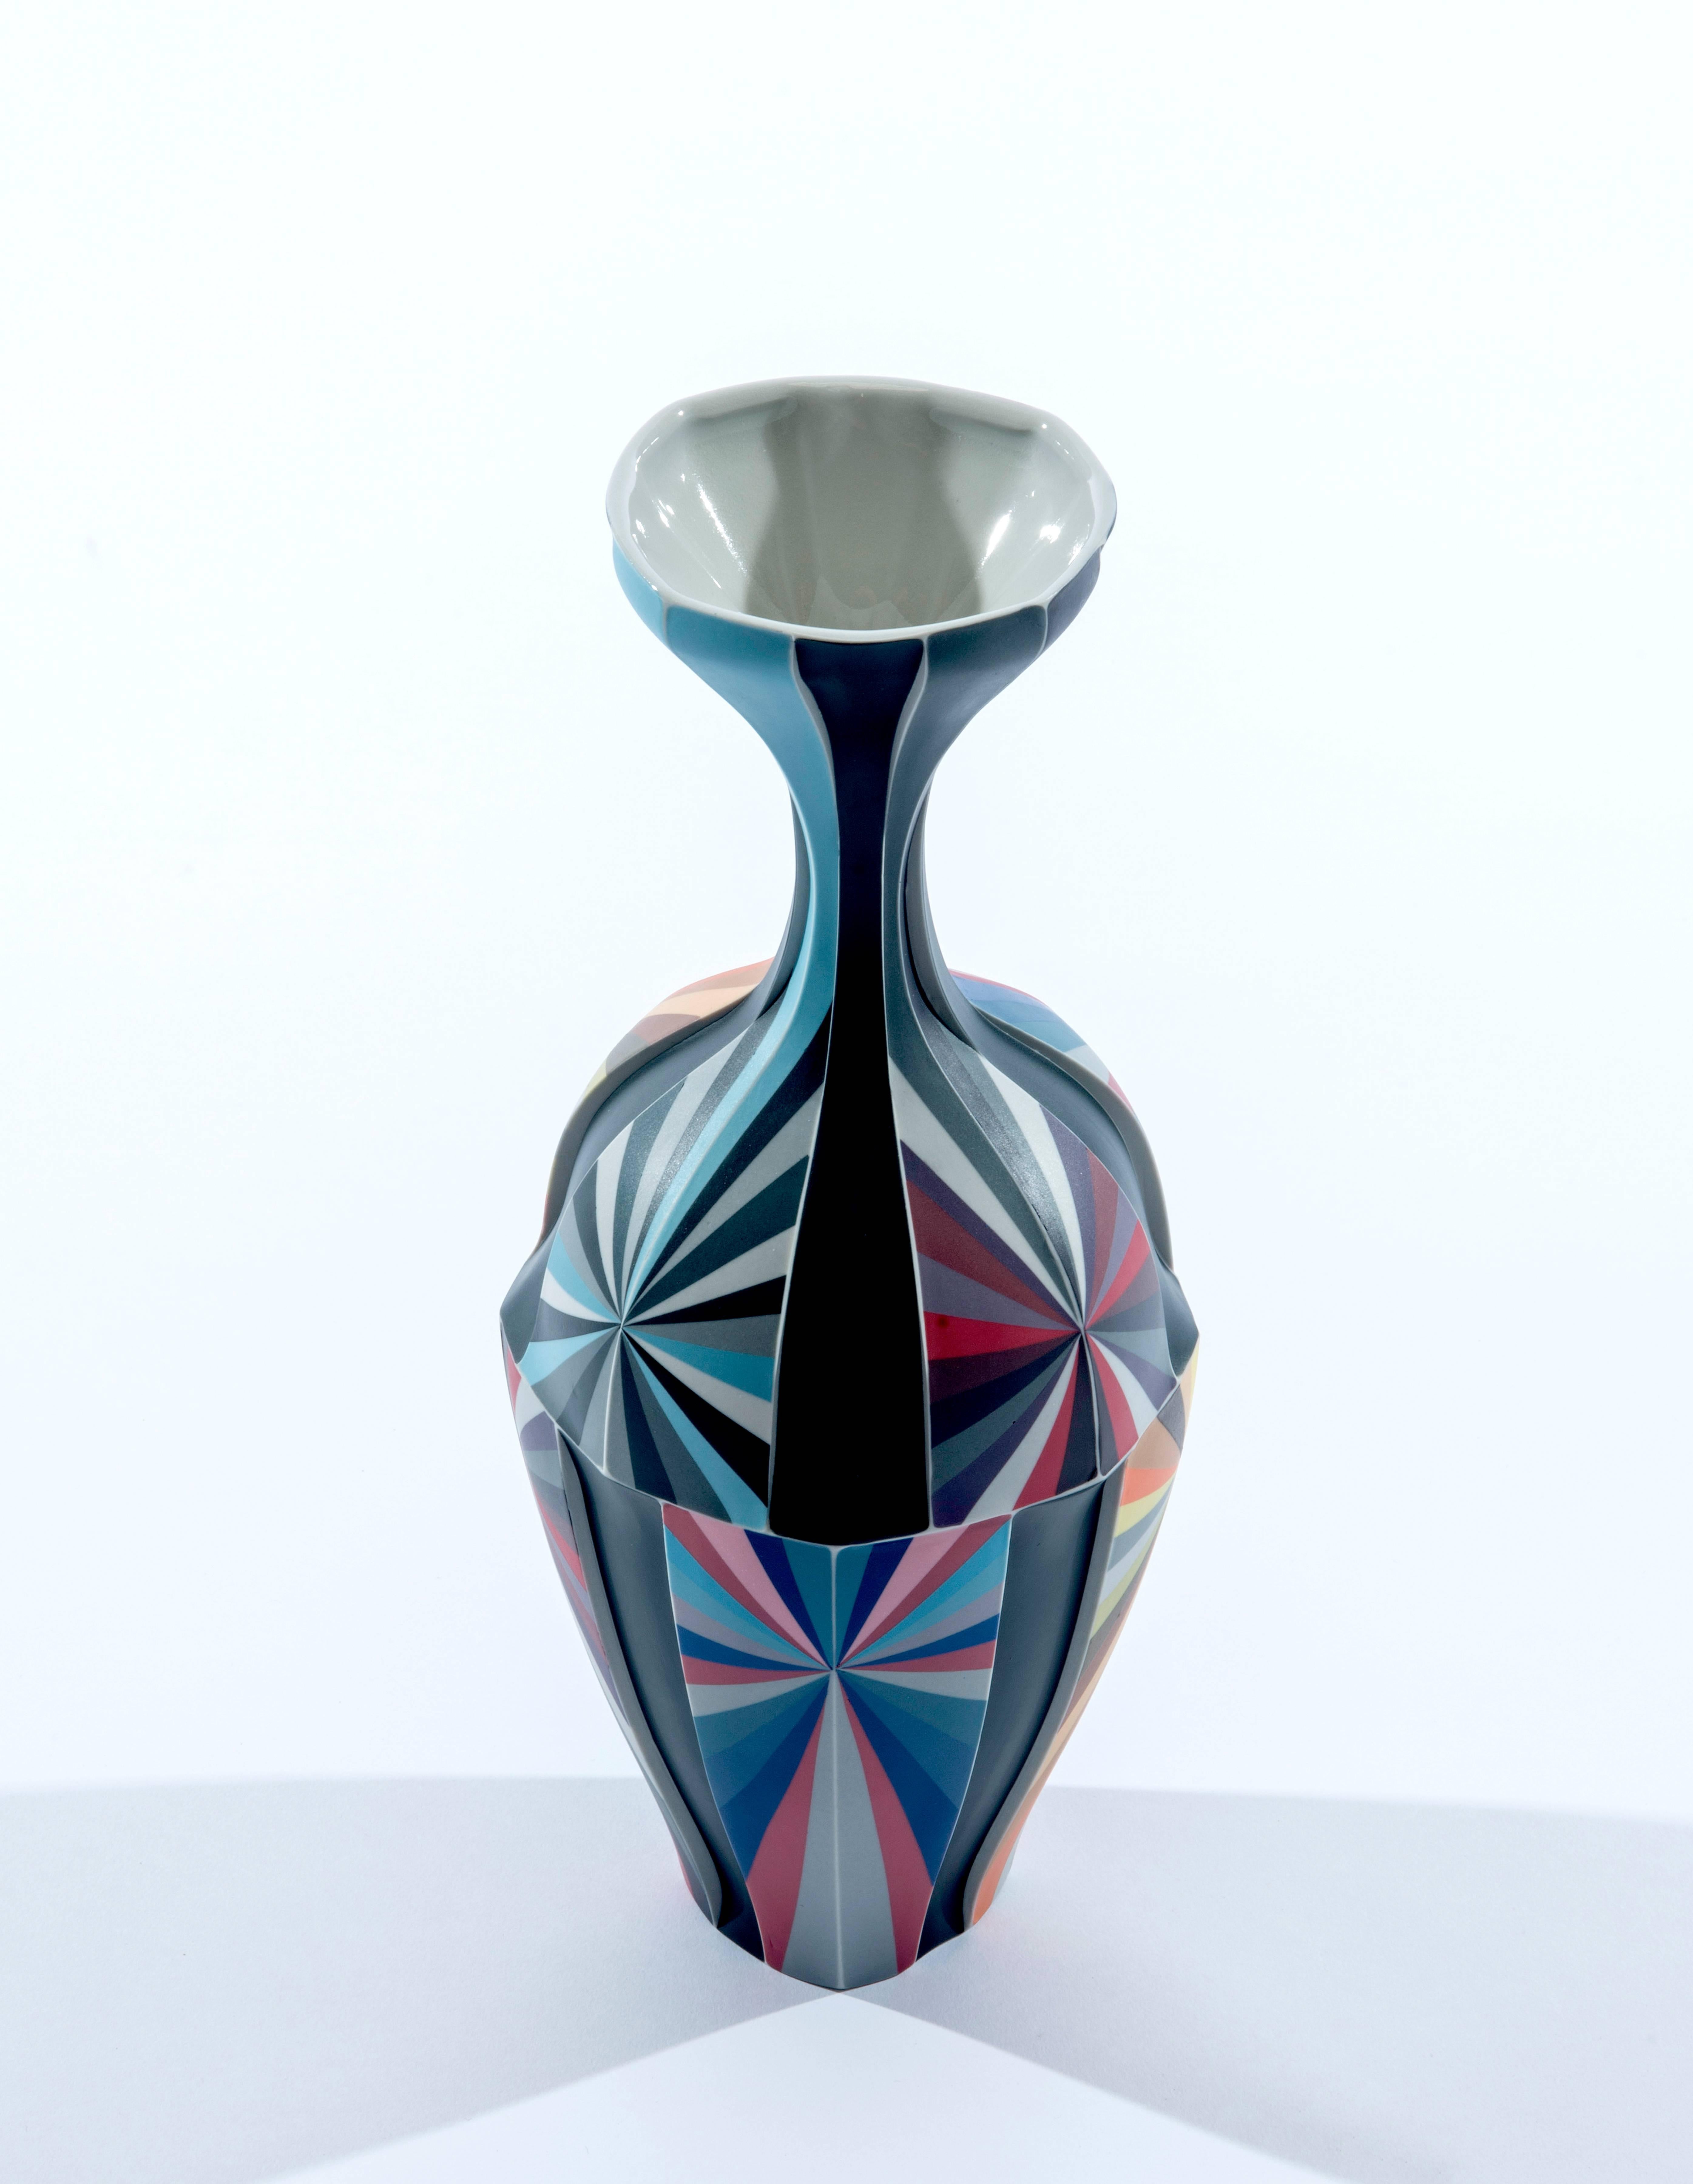 Peter Pincus
Grey, Orange, Blue and Red Color Fields Offset Vessel, 2018
Colored porcelain
13 x 5 x 5 in
Signed 